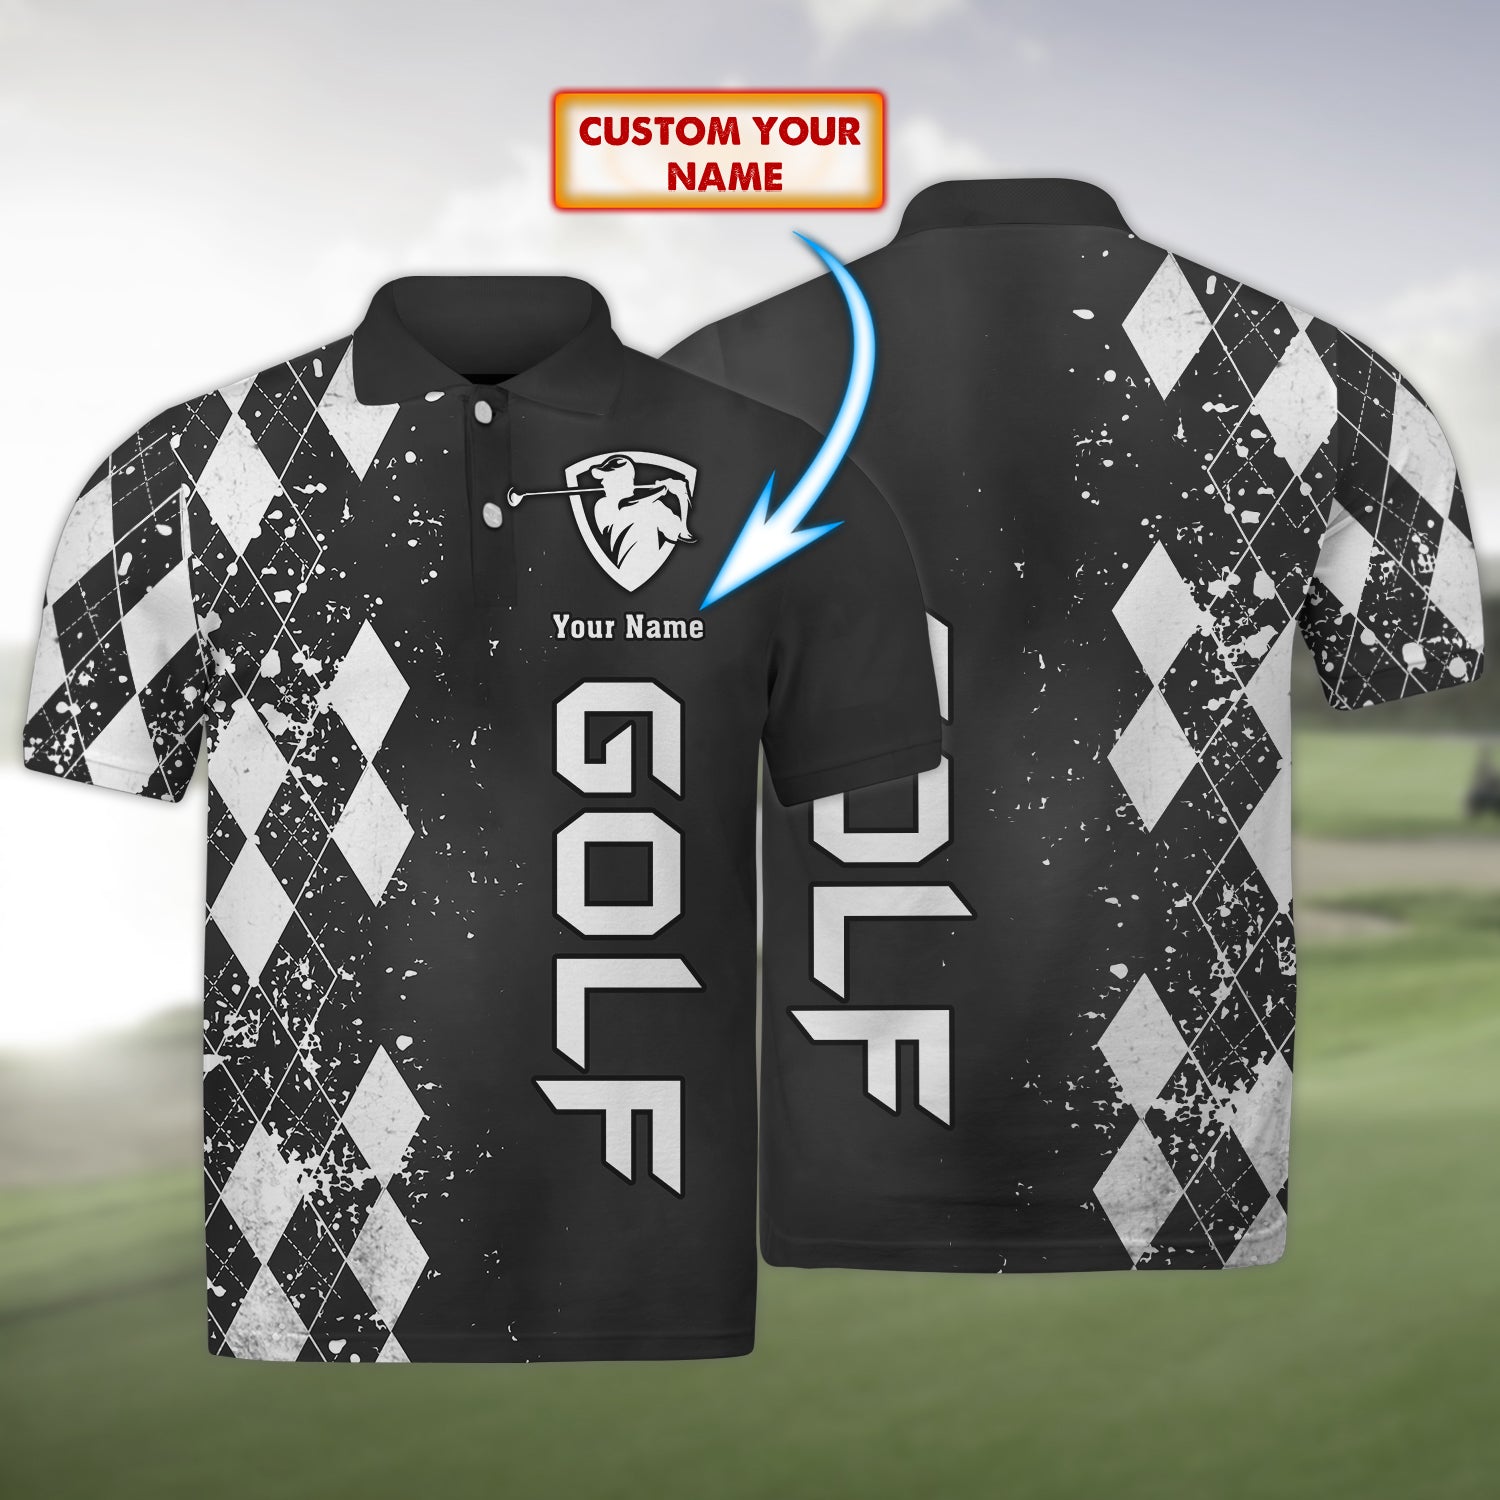 GOLF - Personalized Name 3D Polo Shirt 03 - RINC98